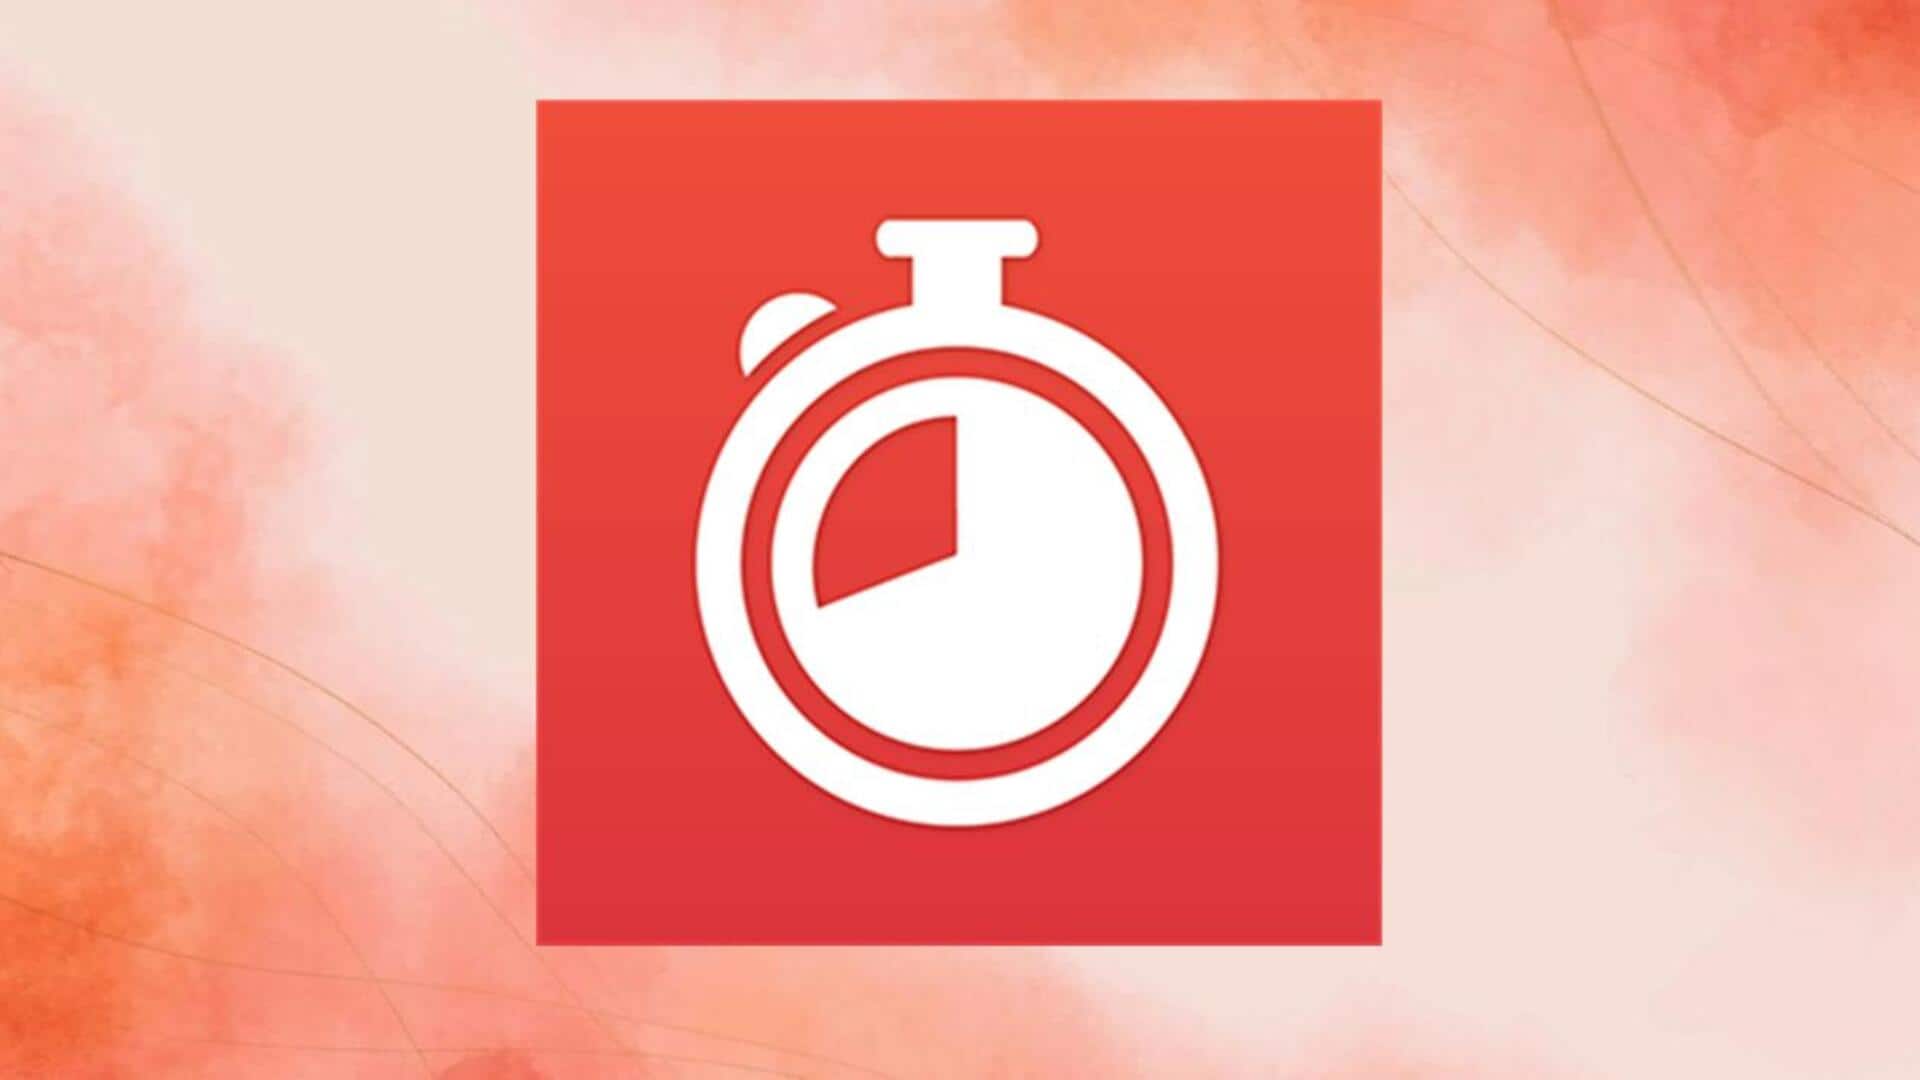 Manage your time wisely with the Be Focused Timer app